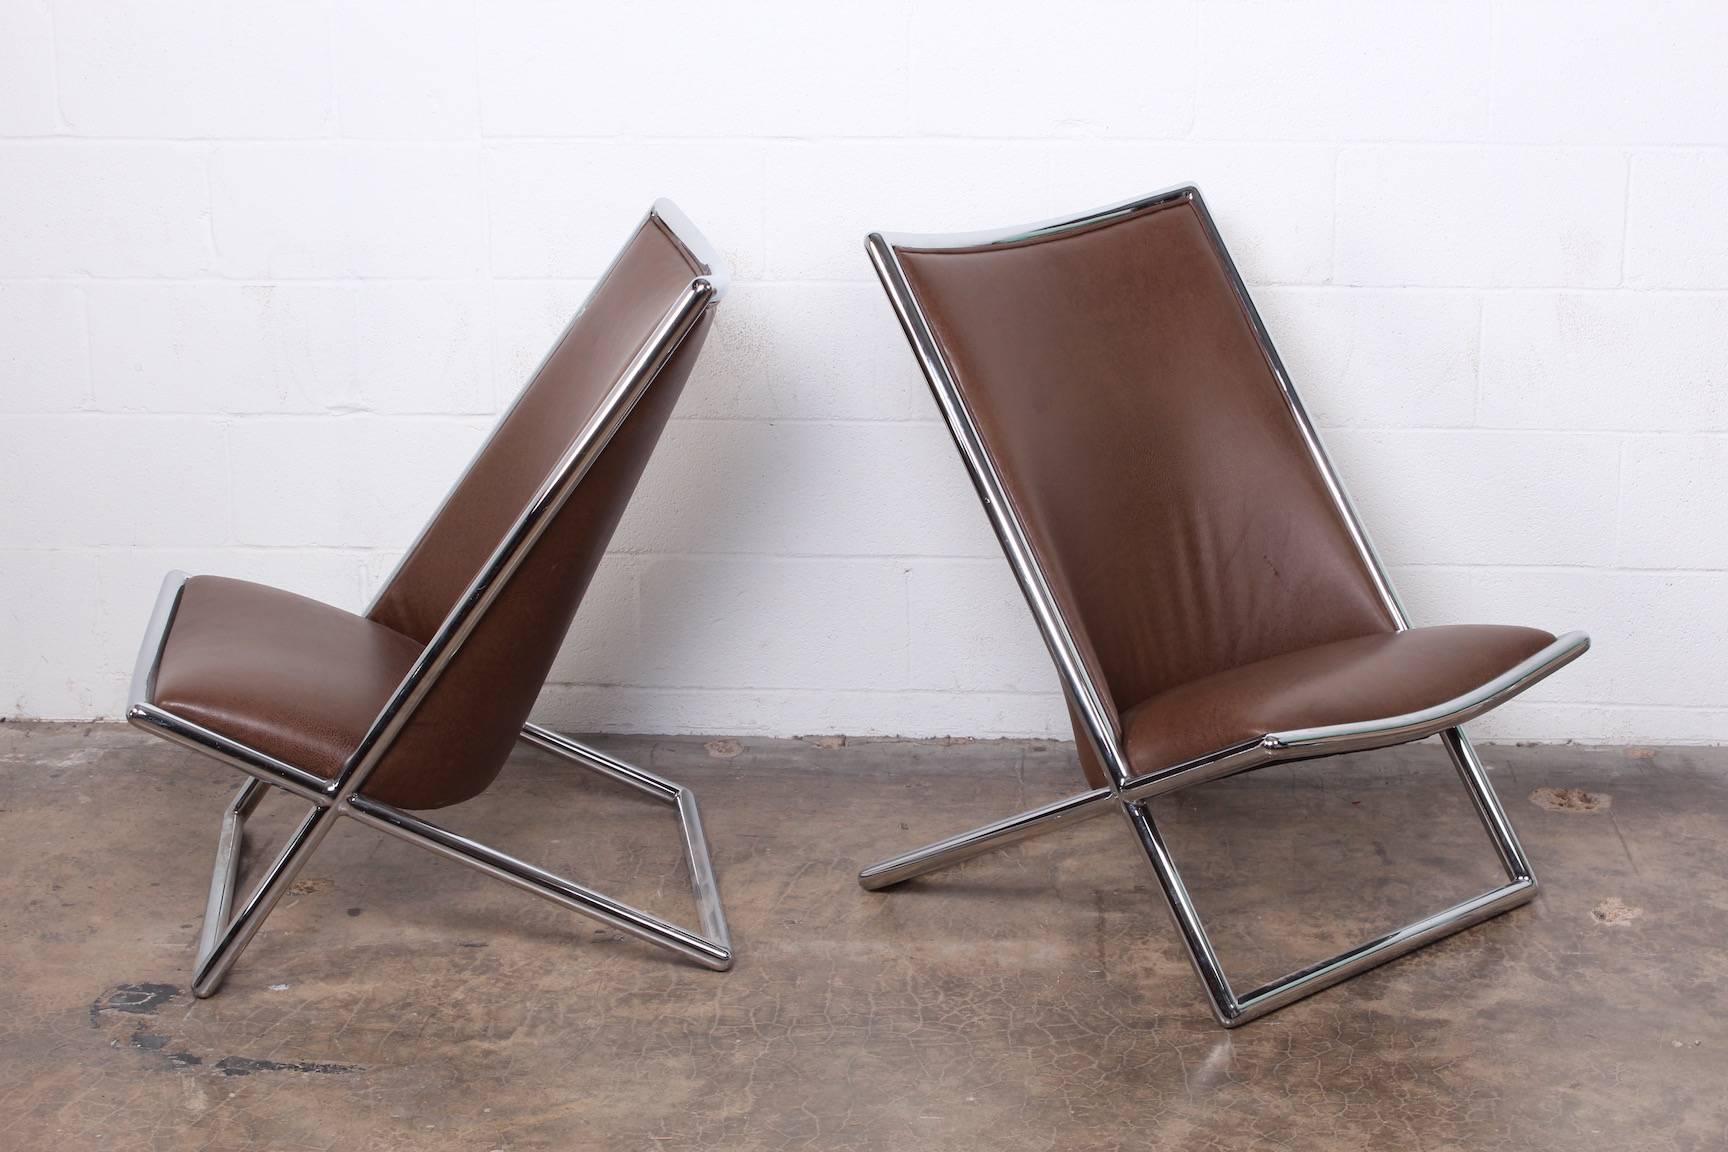 A pair of Ward Bennett scissor chairs upholstered in brown leather.